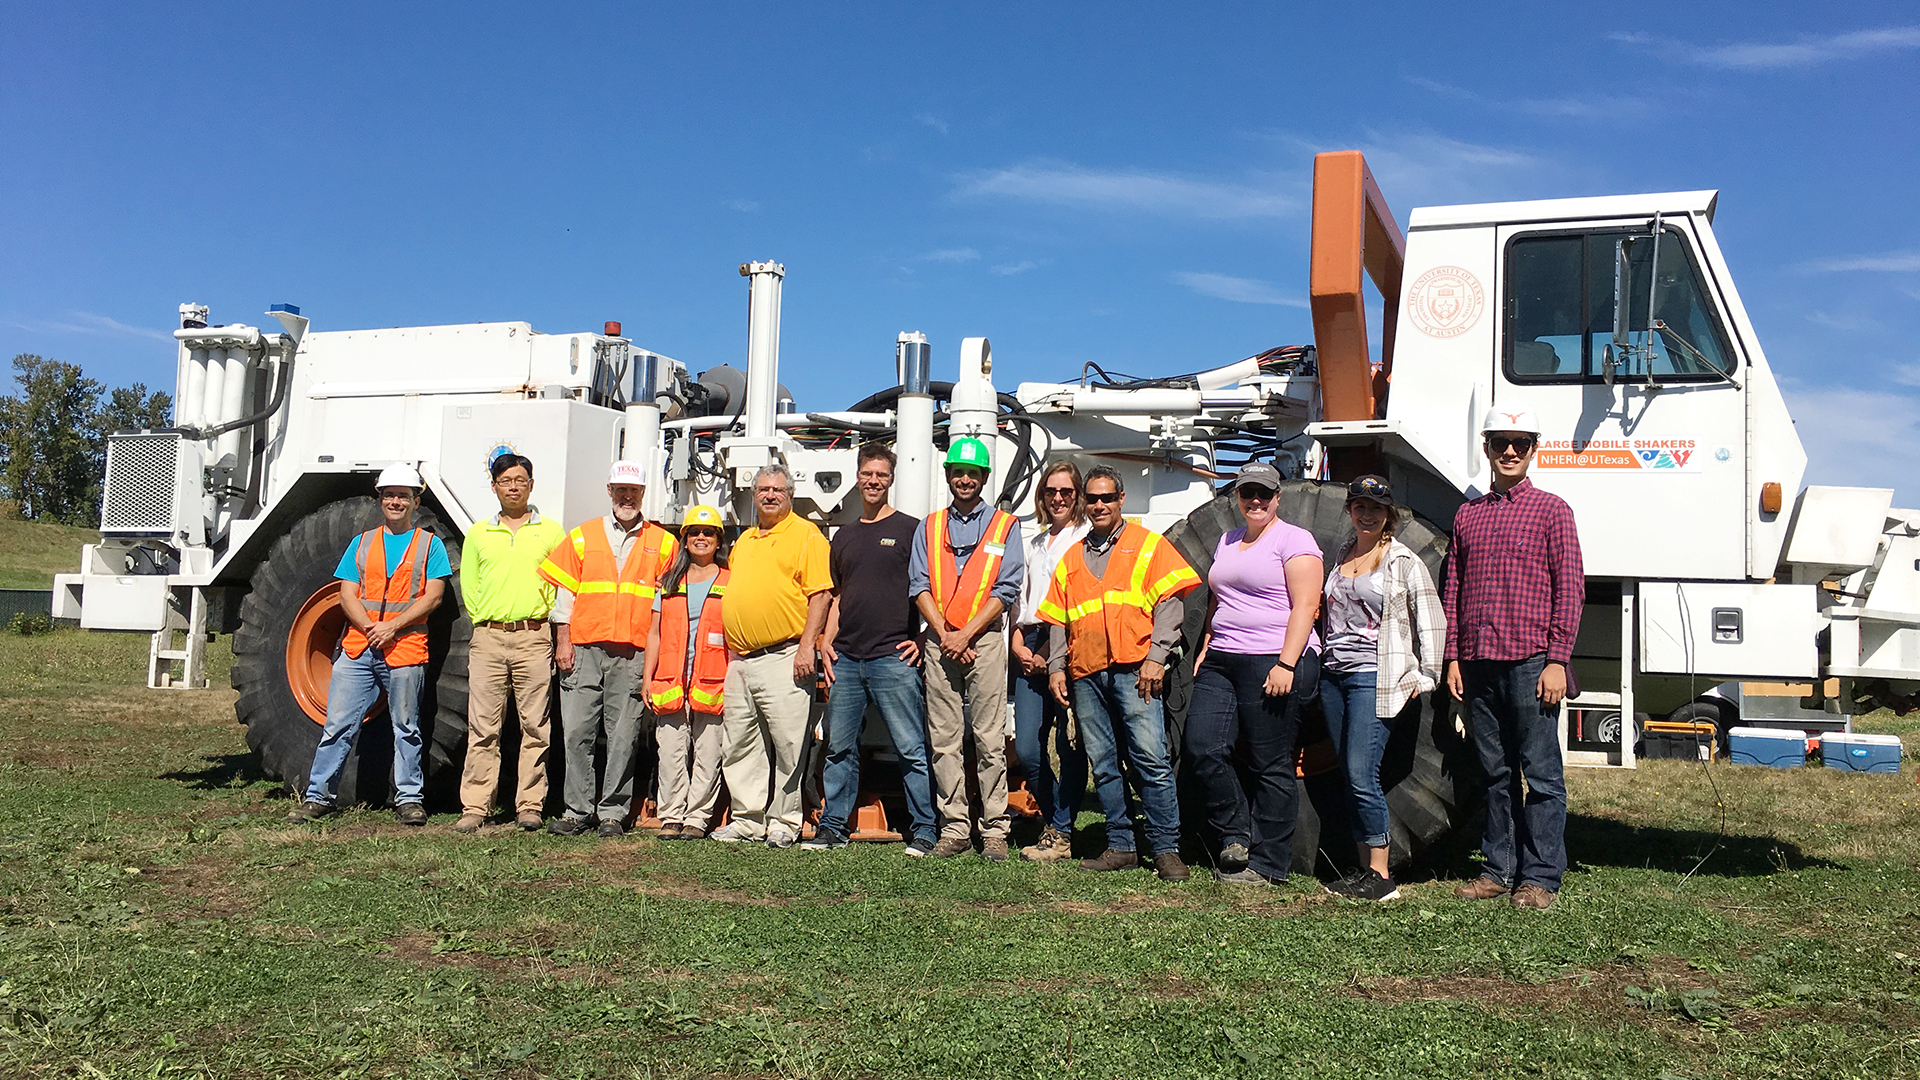 Geotechnical engineering team with T-Rex ground shaker at test site in Oregon